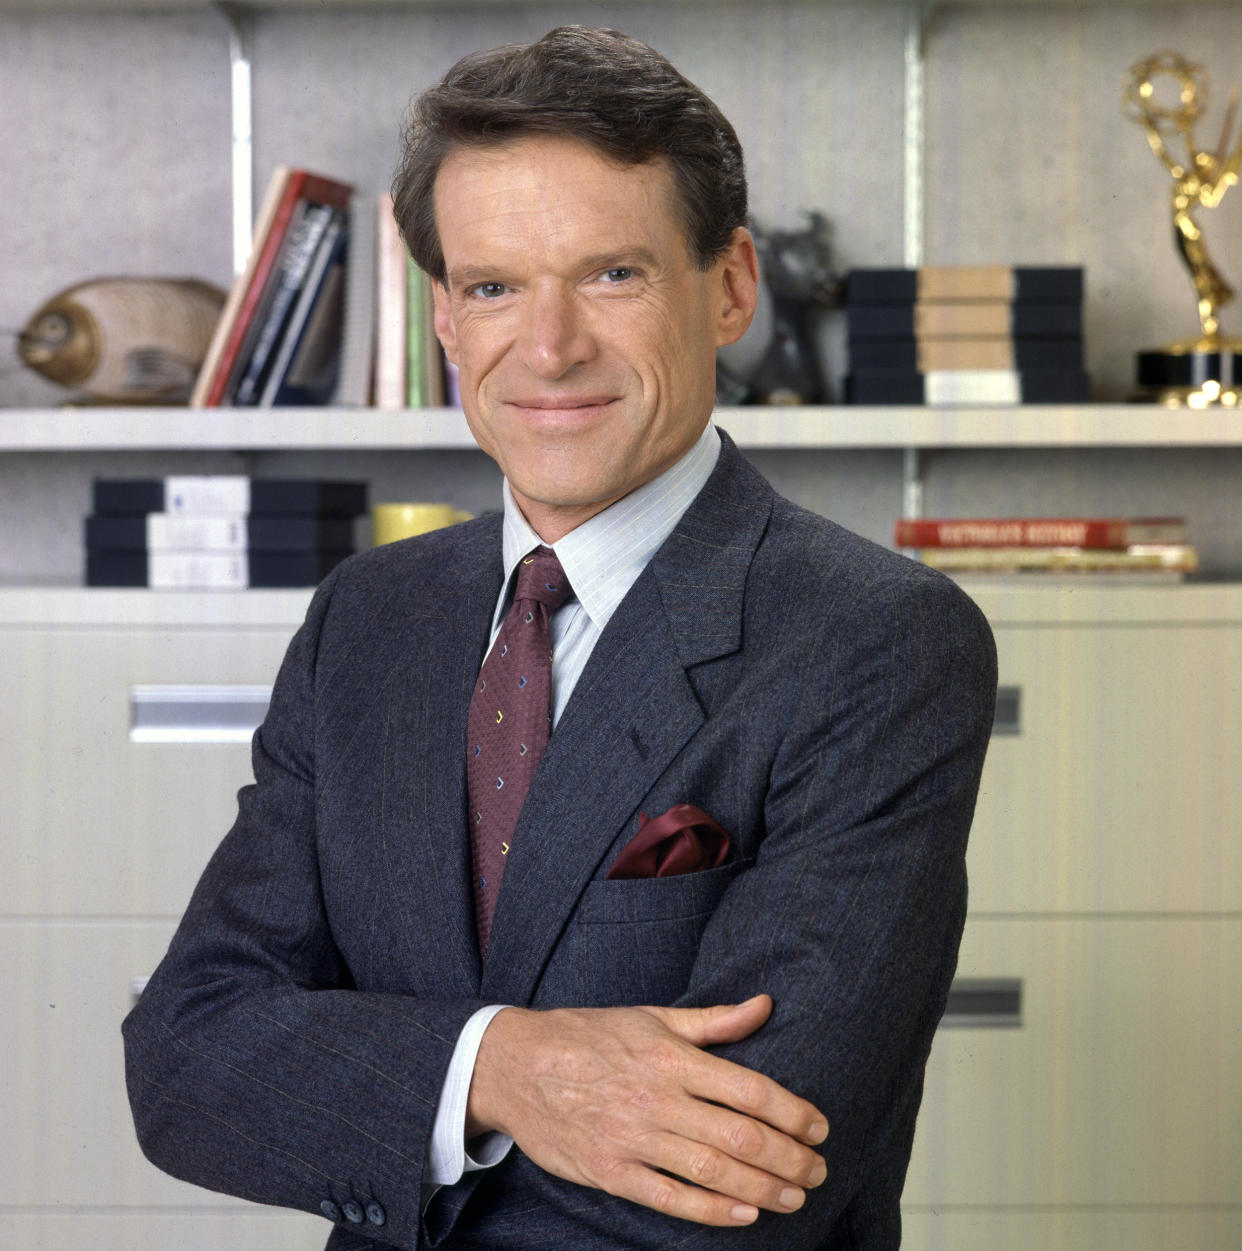 Murphy Brown, a CBS television situation comedy program featuring topical current events and satire. Pictured is Charles Kimbrough (as Jim Dial, news anchor).  January 1, 1993. (CBS Photo Archive / Getty Images)